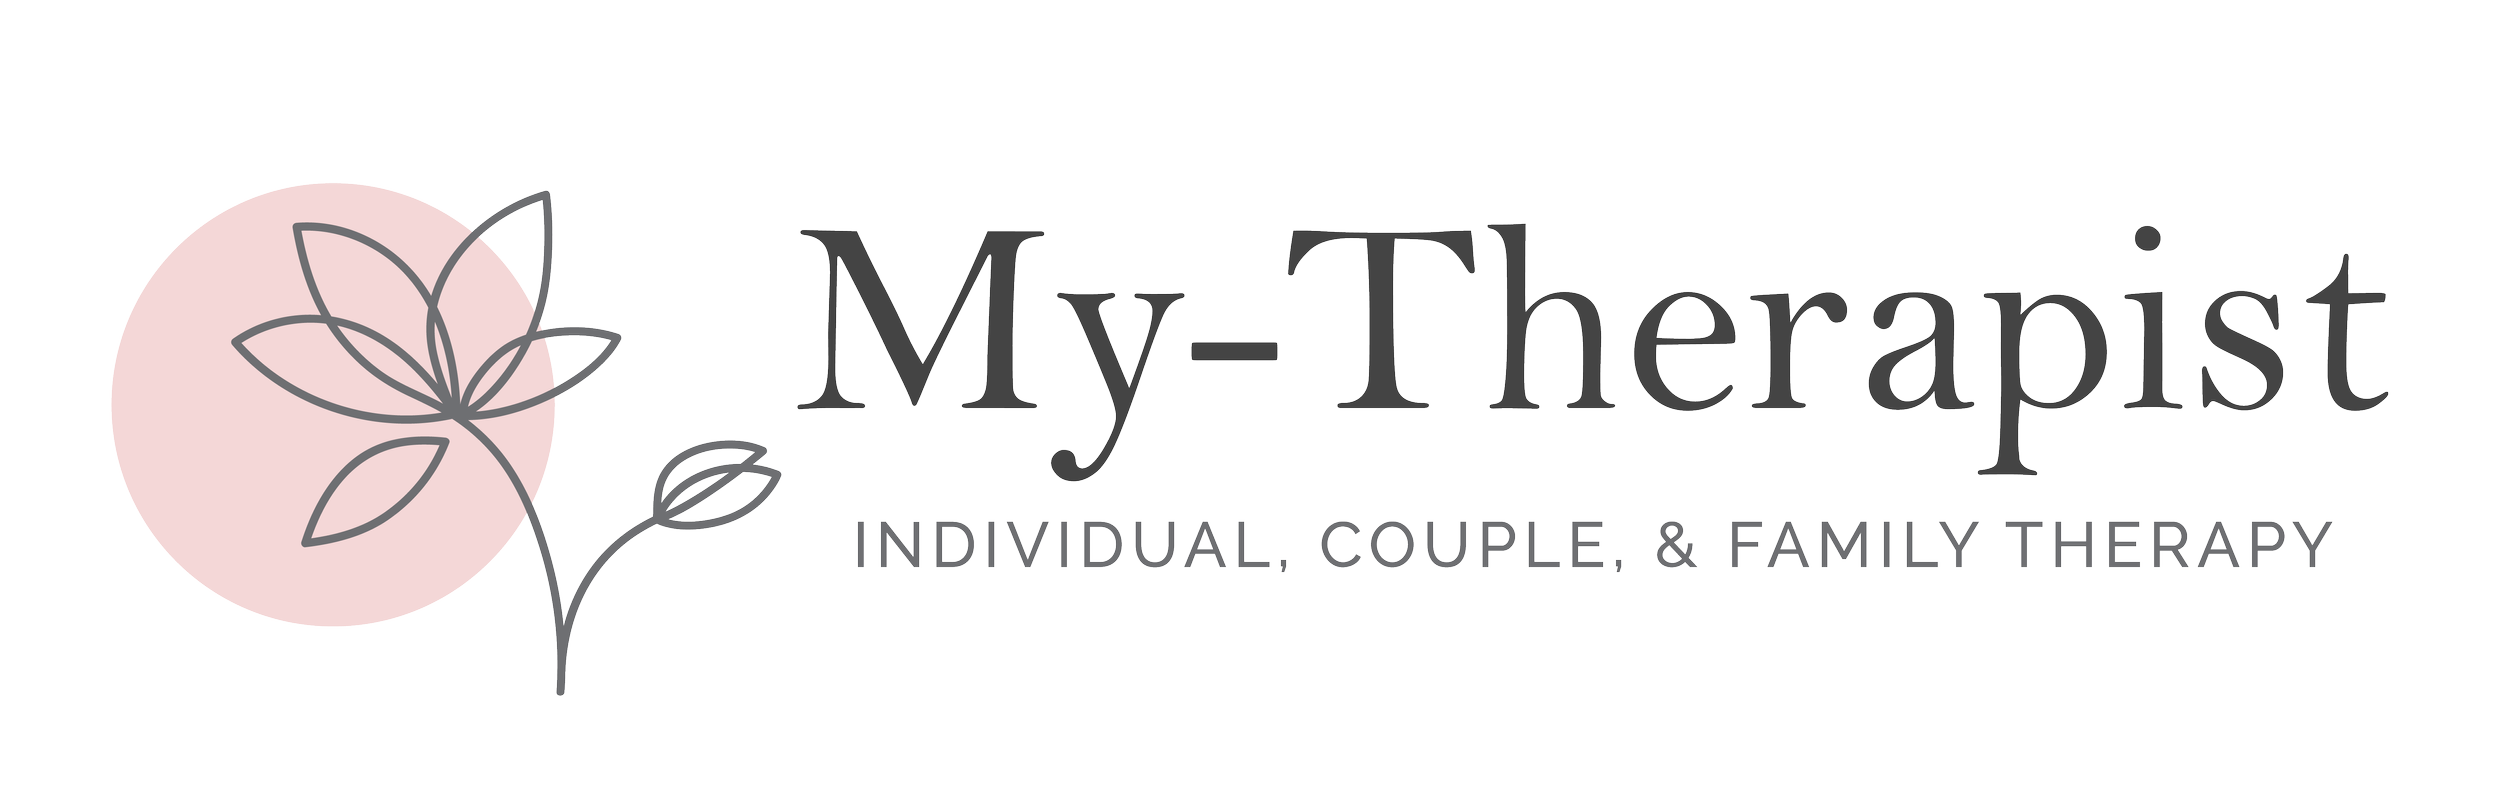 My-Therapist | Couples and Individual Therapy in Wake Forest, NC